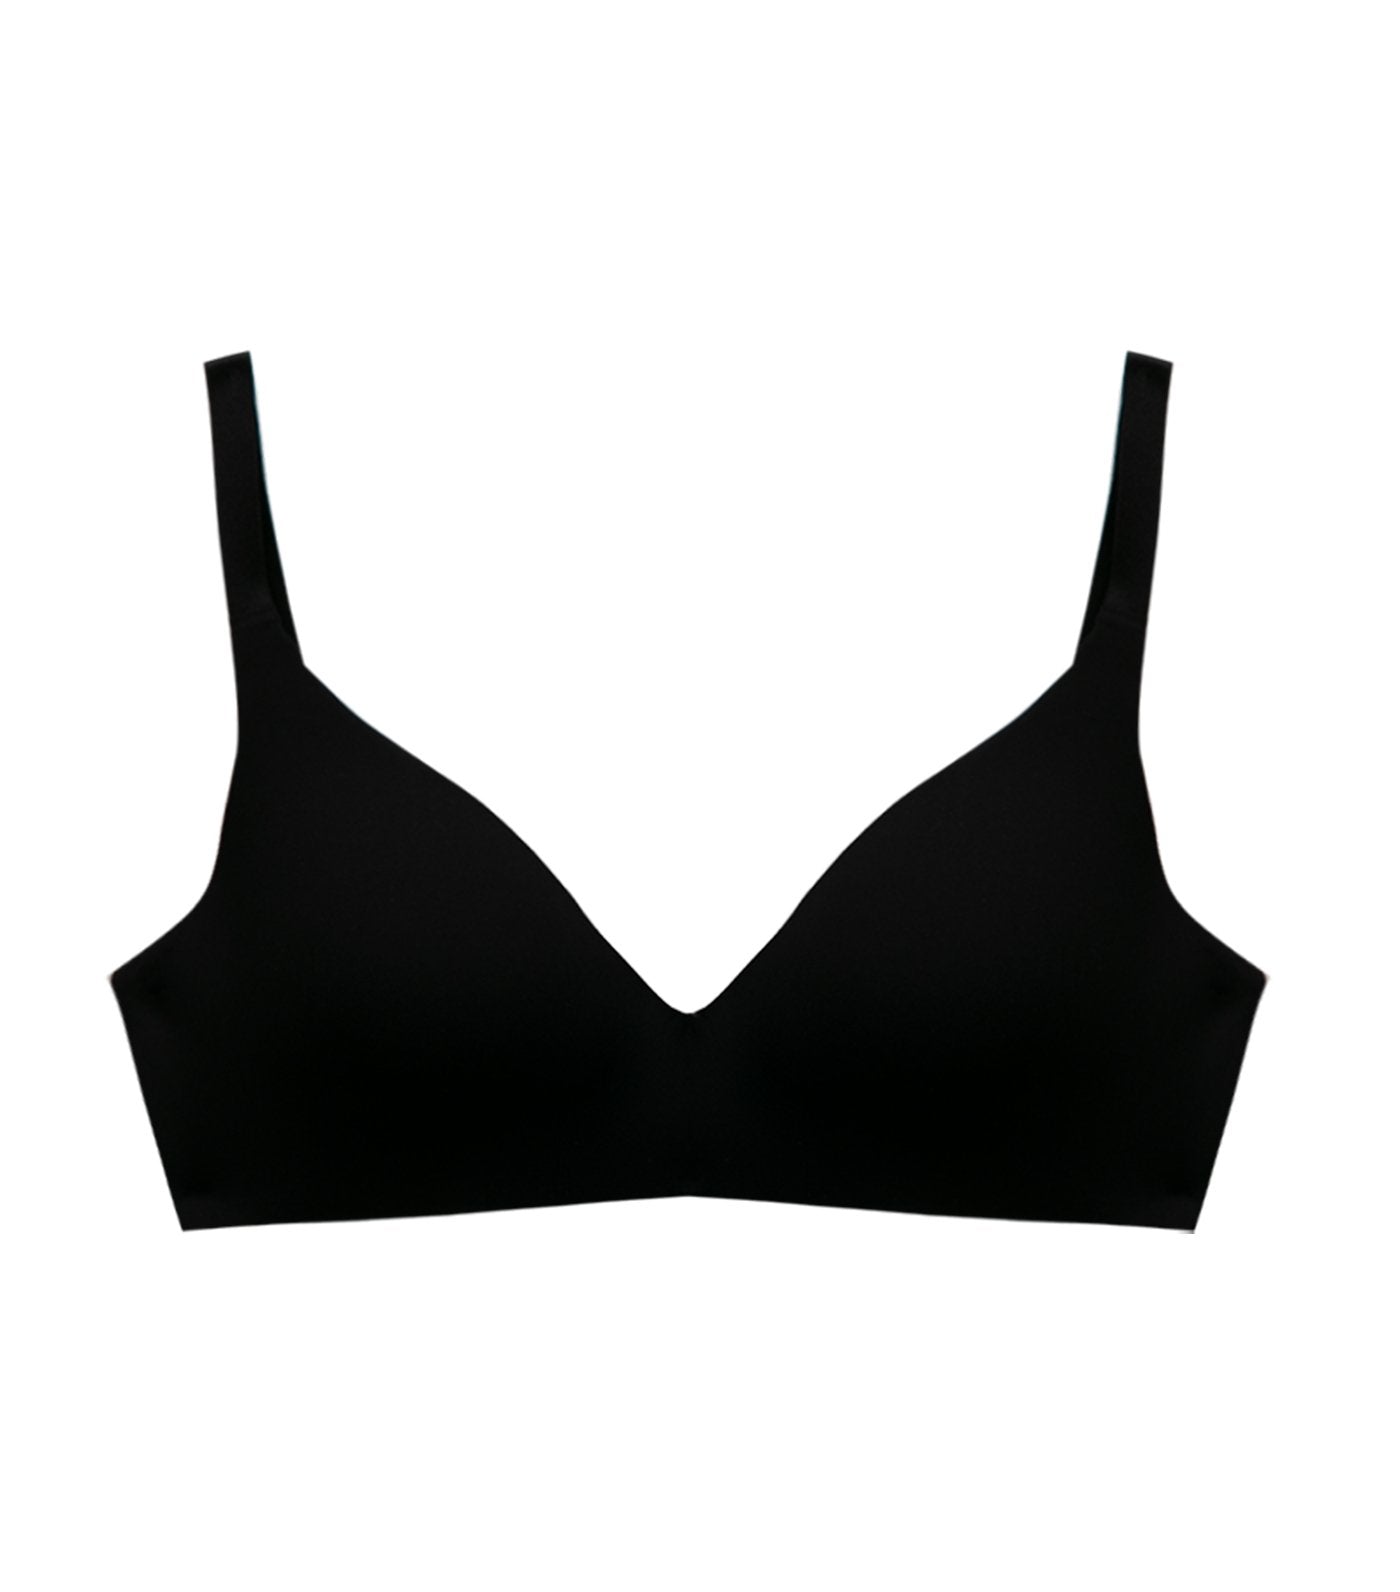 TRYLO Women's Non-Wired Bra Alpa 44D Black - Roopsons